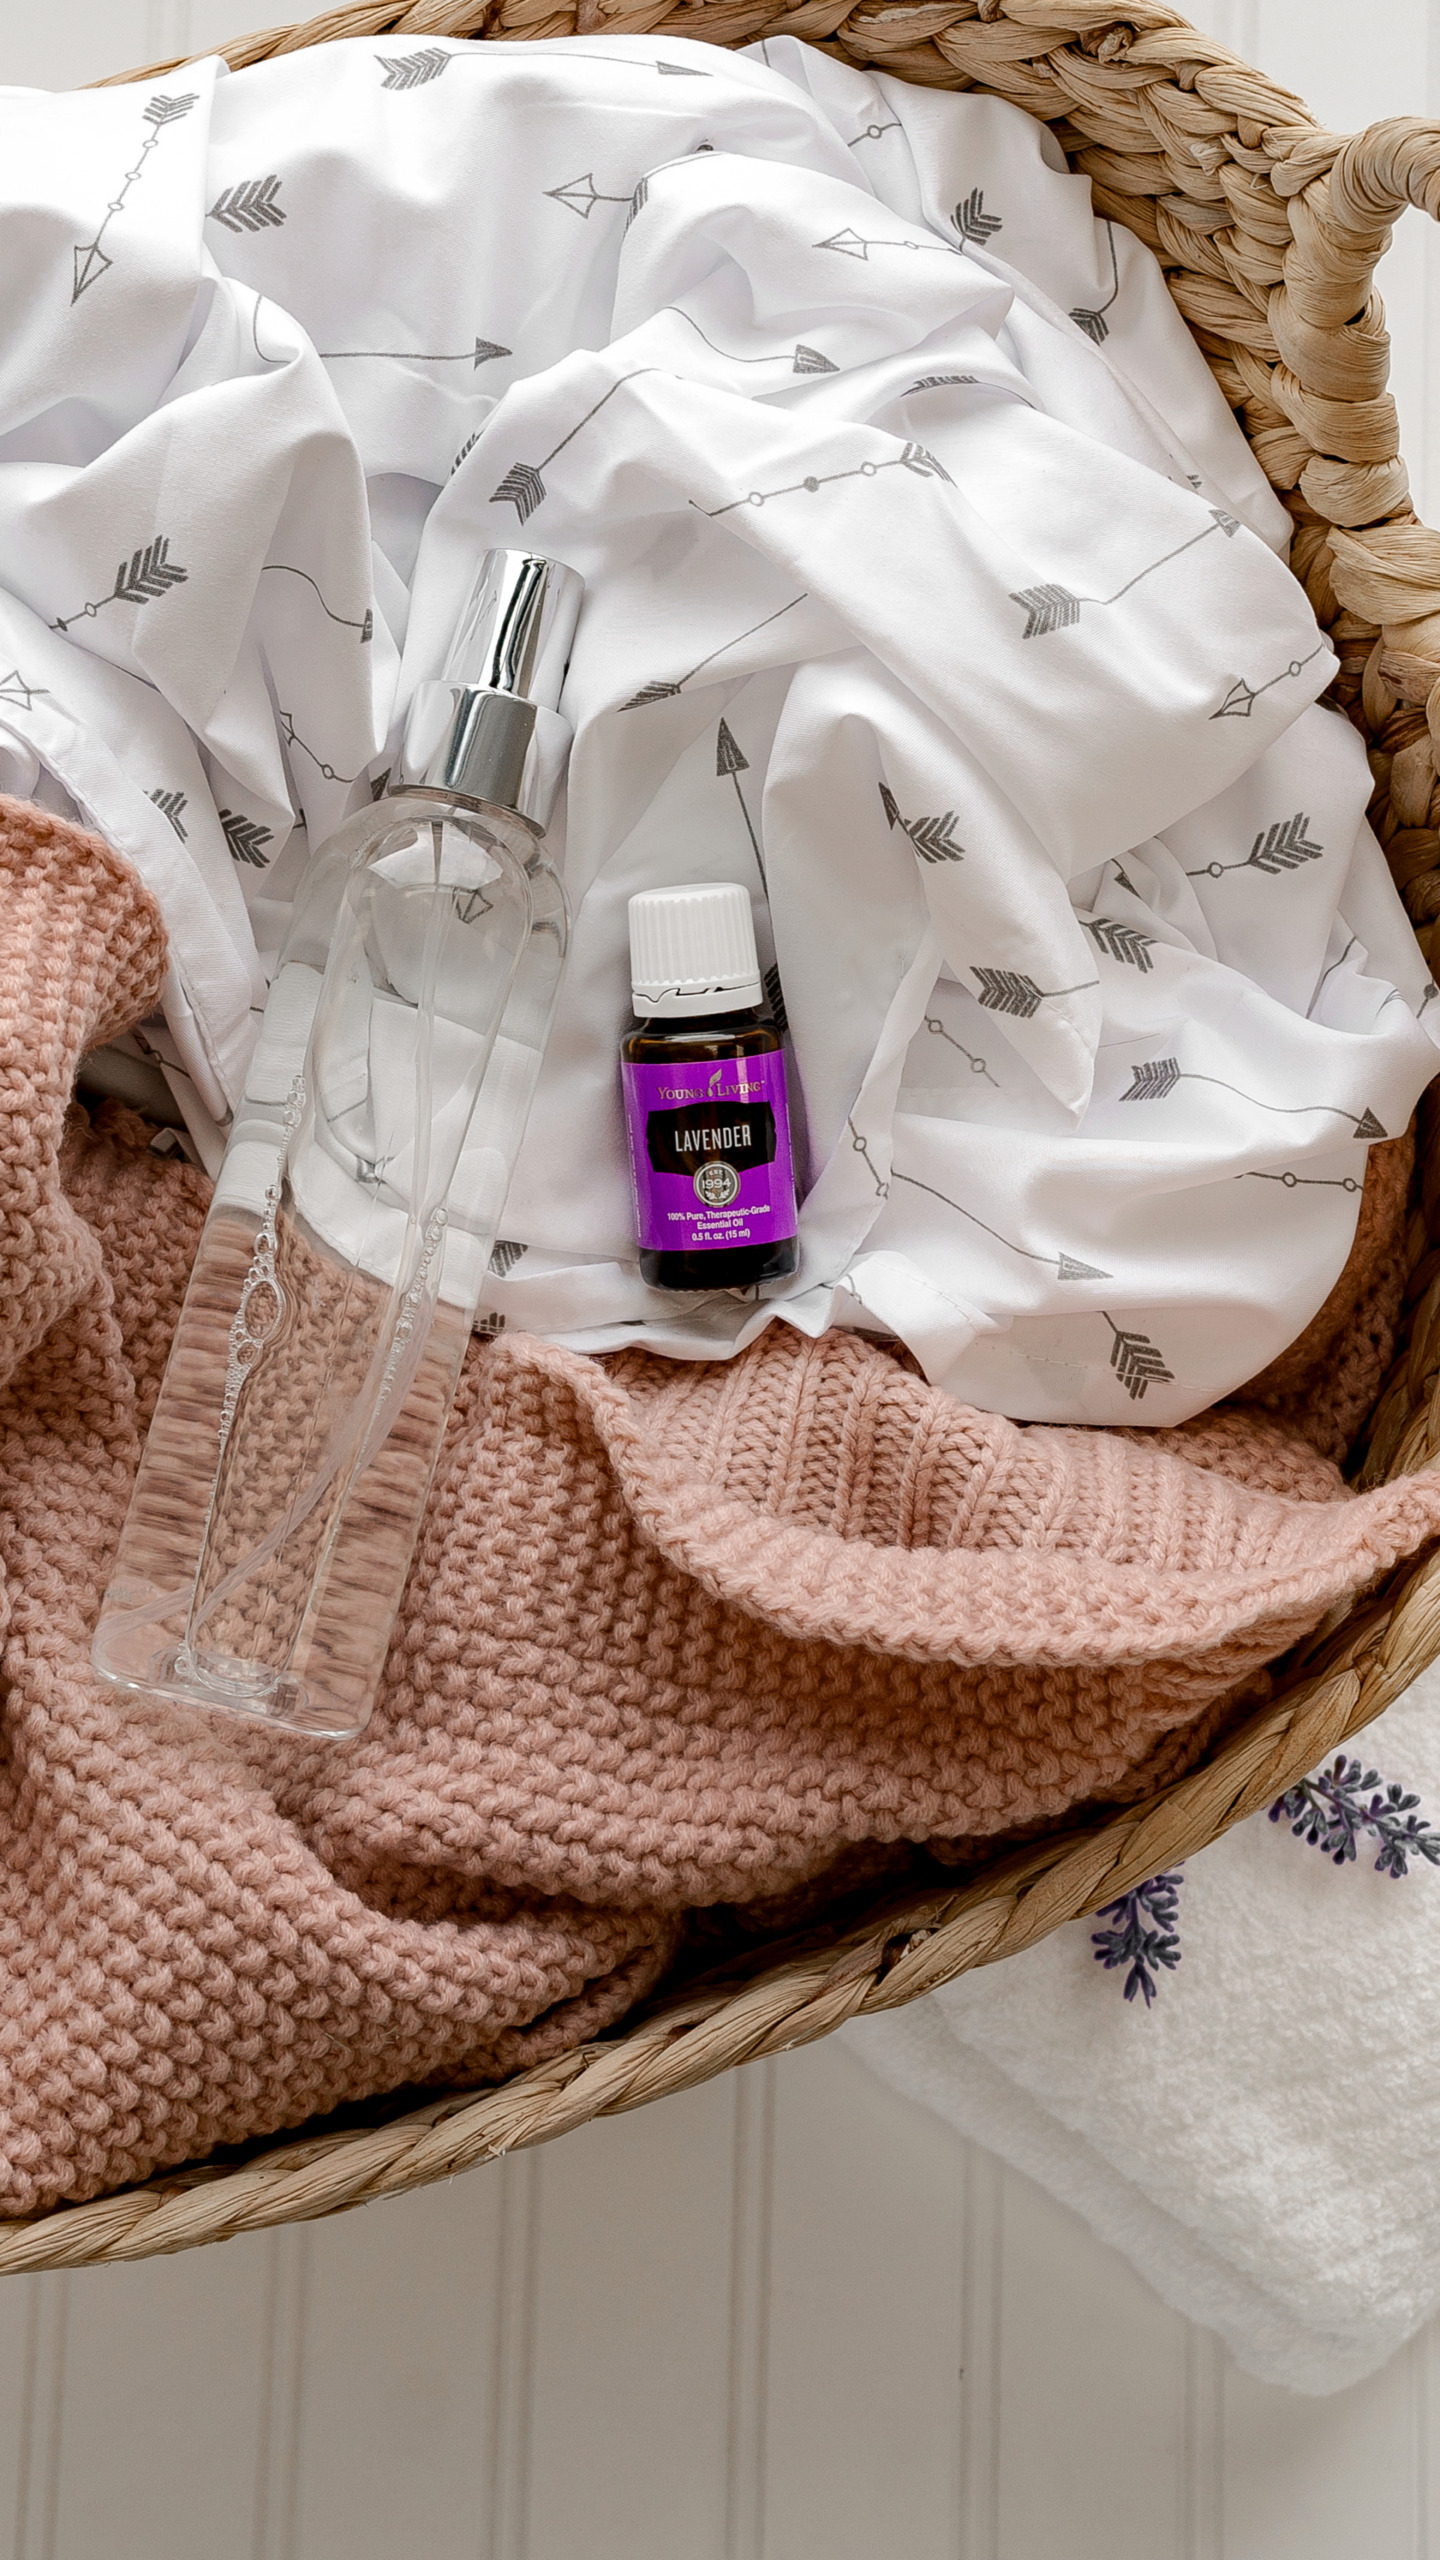 Laundry and essential oils